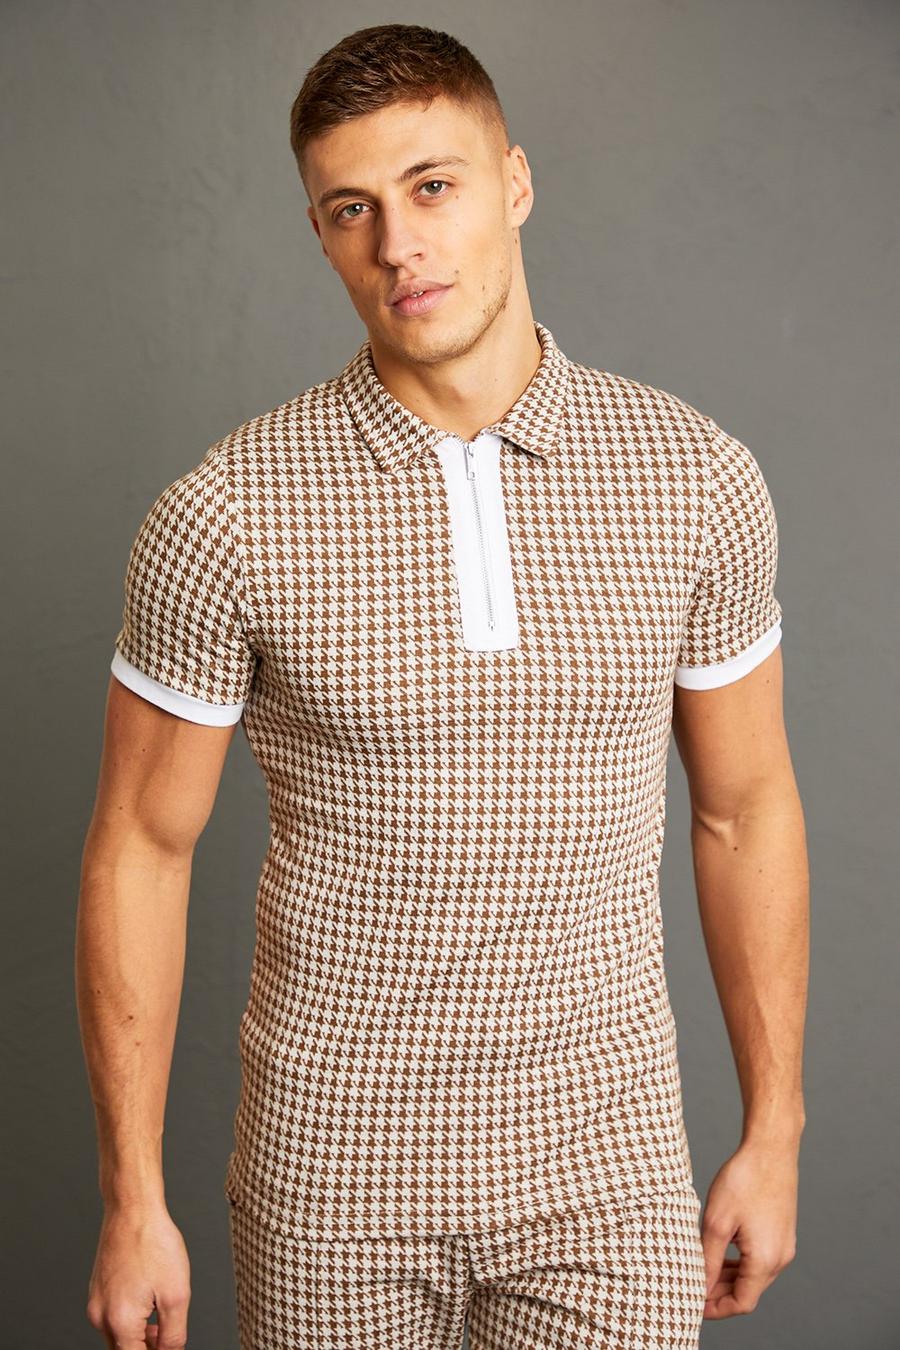 Chocolate brown Muscle Fit Houndstooth Jacquard Zip Polo